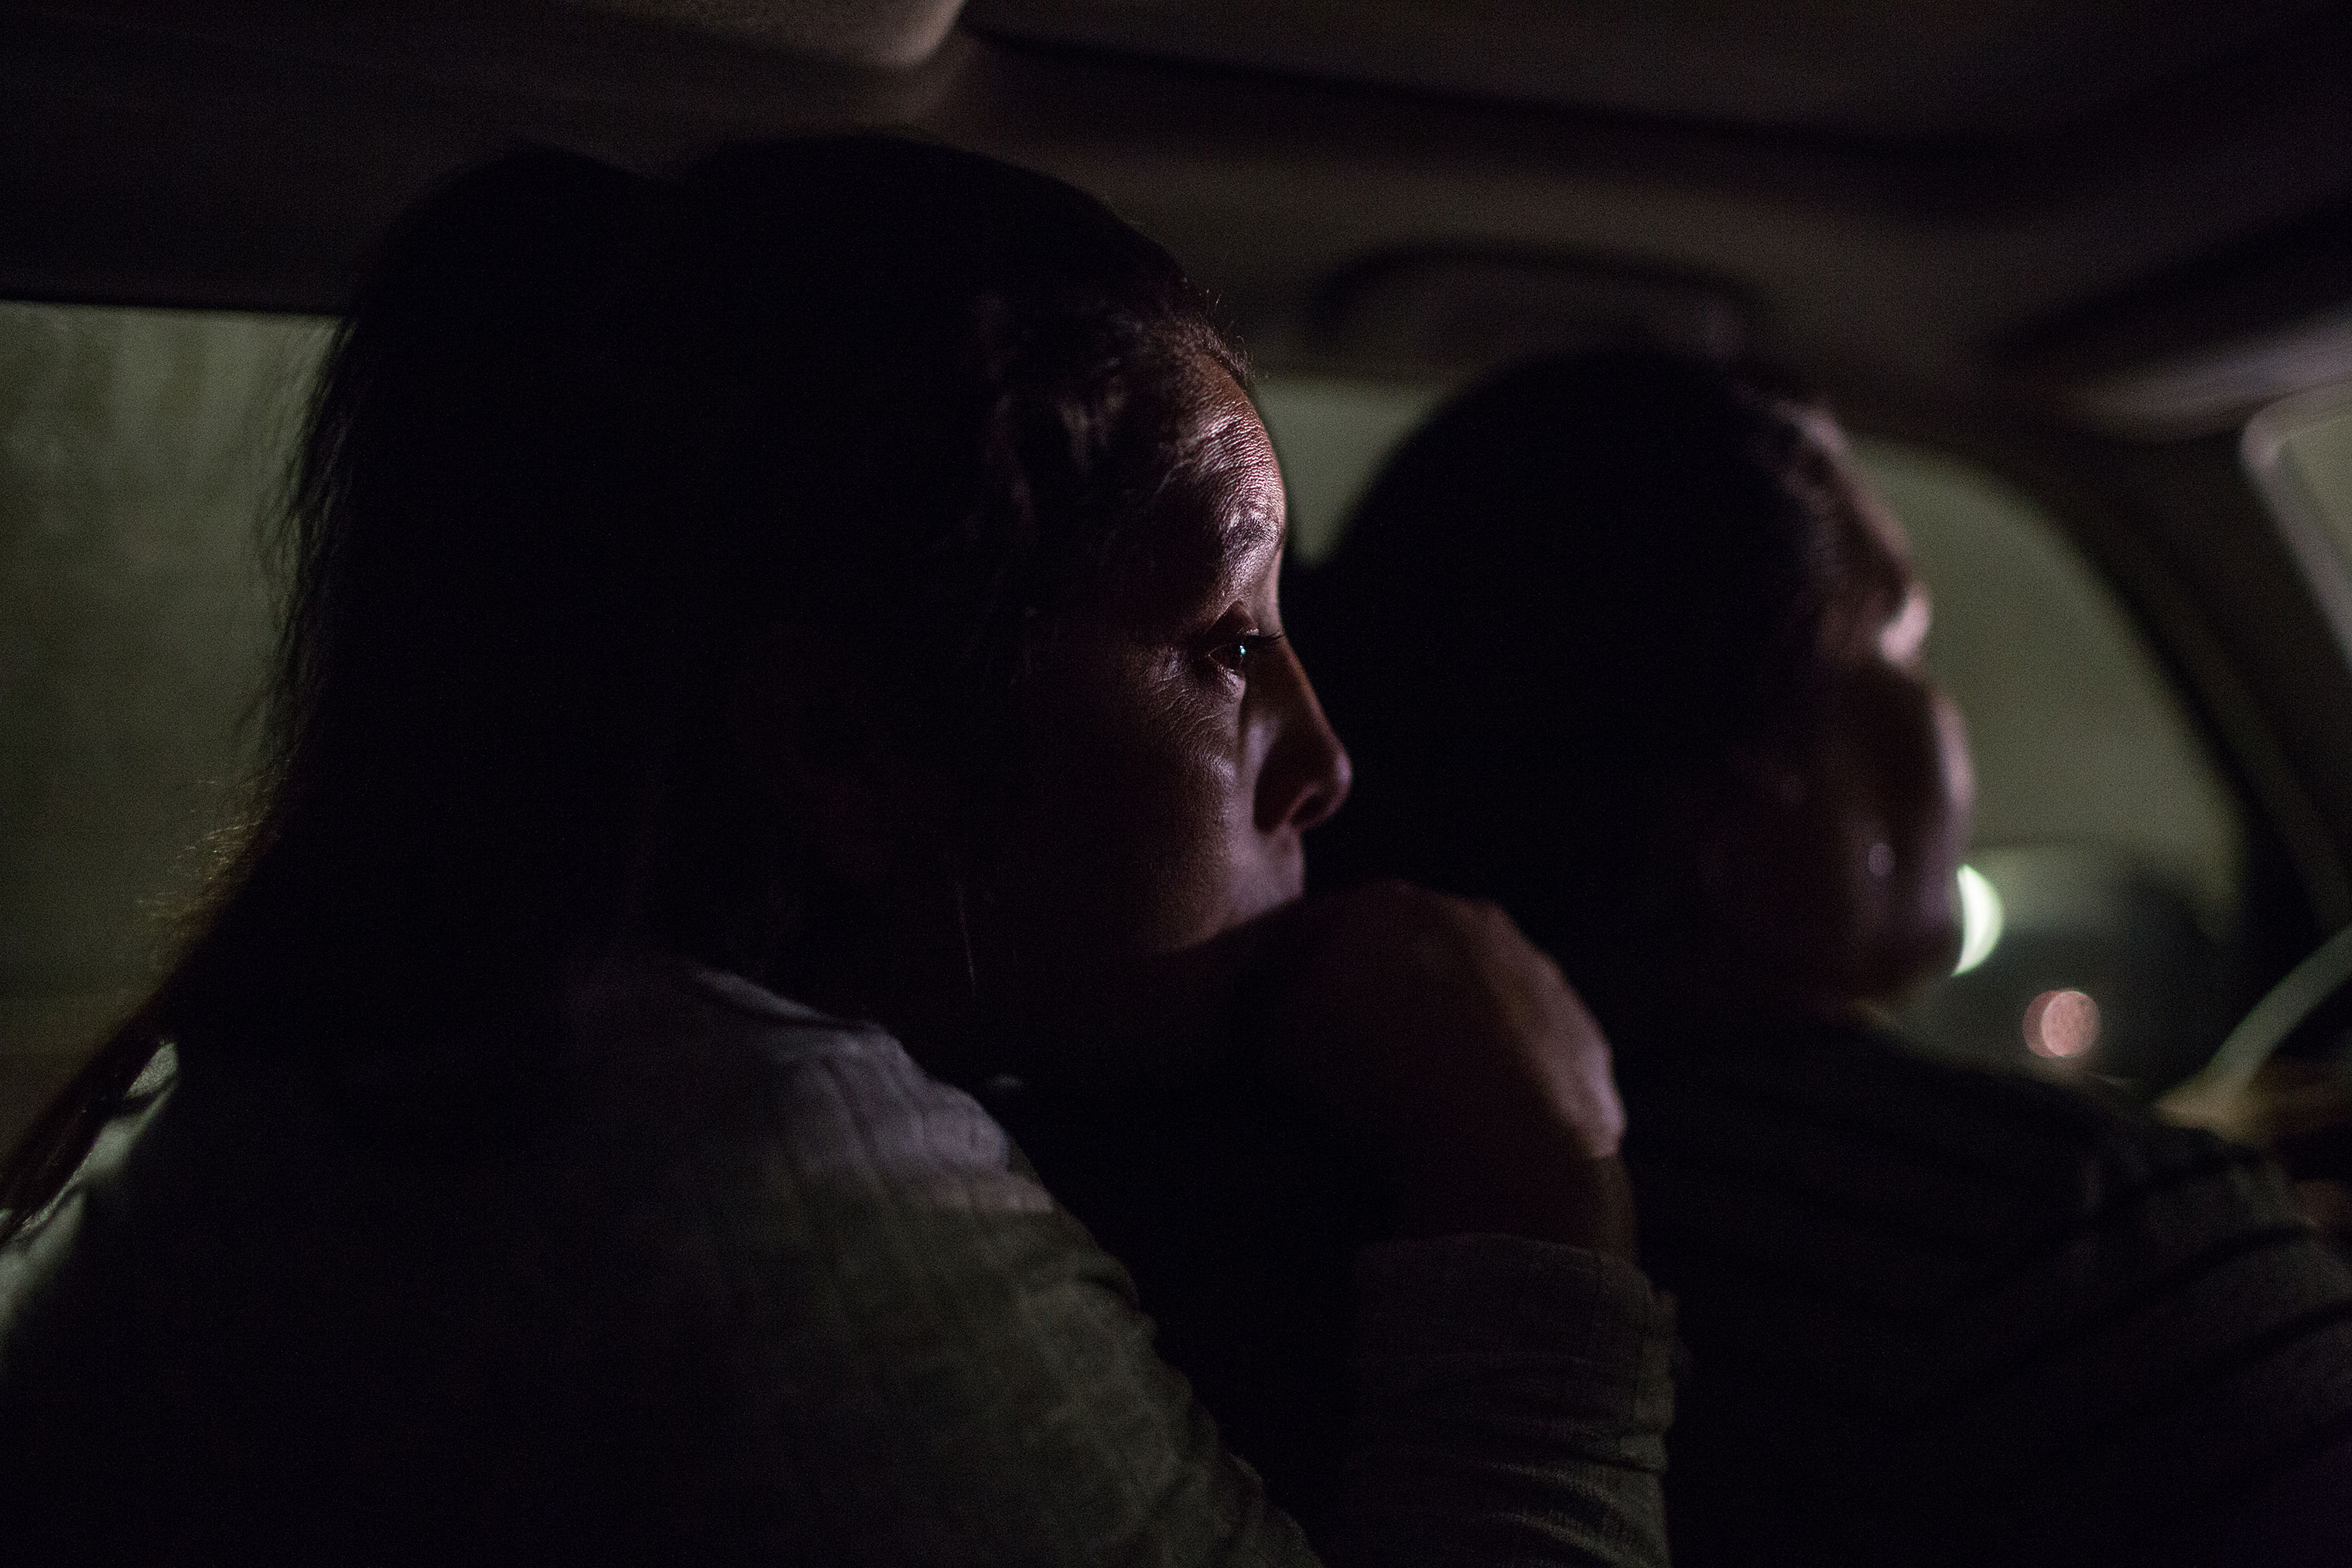 Maria, left, sits in the back of a car returning to suburban Washington, D.C., after visiting her brother, who also lives on the East Coast, on March 24. Castro often gets sad and misses her mother and her other children. “I still have a house in Honduras, it's the house my dad gave me; it’s not a real house, it's made of mud,” said Castro. “But it’s all I have there; if this does not work here, that’s where I will go back to.” (Federica Valabrega)